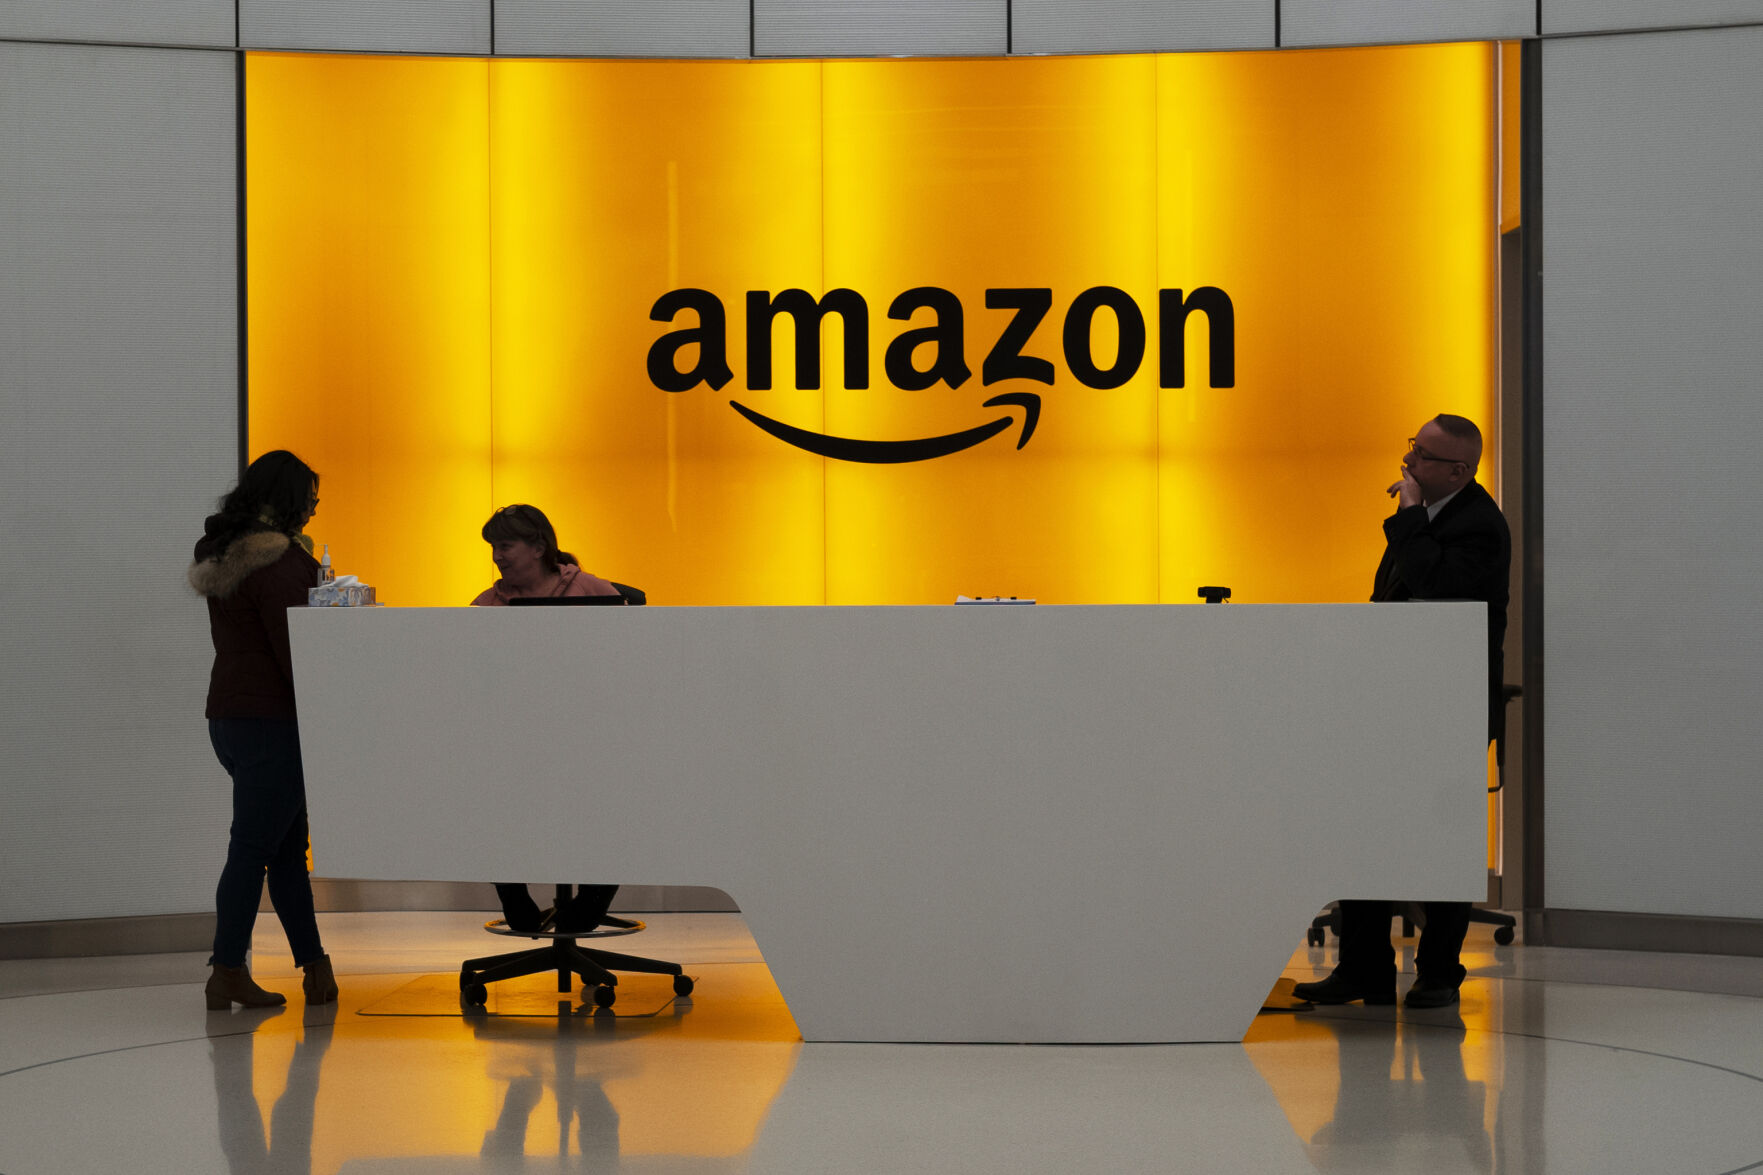 <p>FILE - In this Feb. 14, 2019, file photo people stand in the lobby for Amazon offices in New York. Amazon is kicking off its annual security-focused cloud computing conference on Tuesday amid a slowdown in its profitable cloud business Amazon Web Services, or AWS. (AP Photo/Mark Lennihan, File)</p>   PHOTO CREDIT: Mark Lennihan 